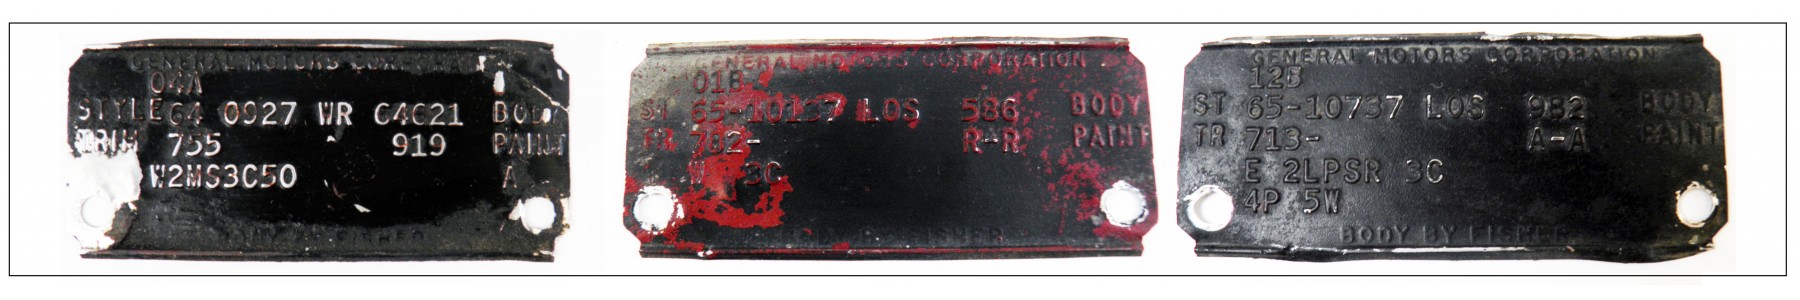 USED 1967 BODY TAGS